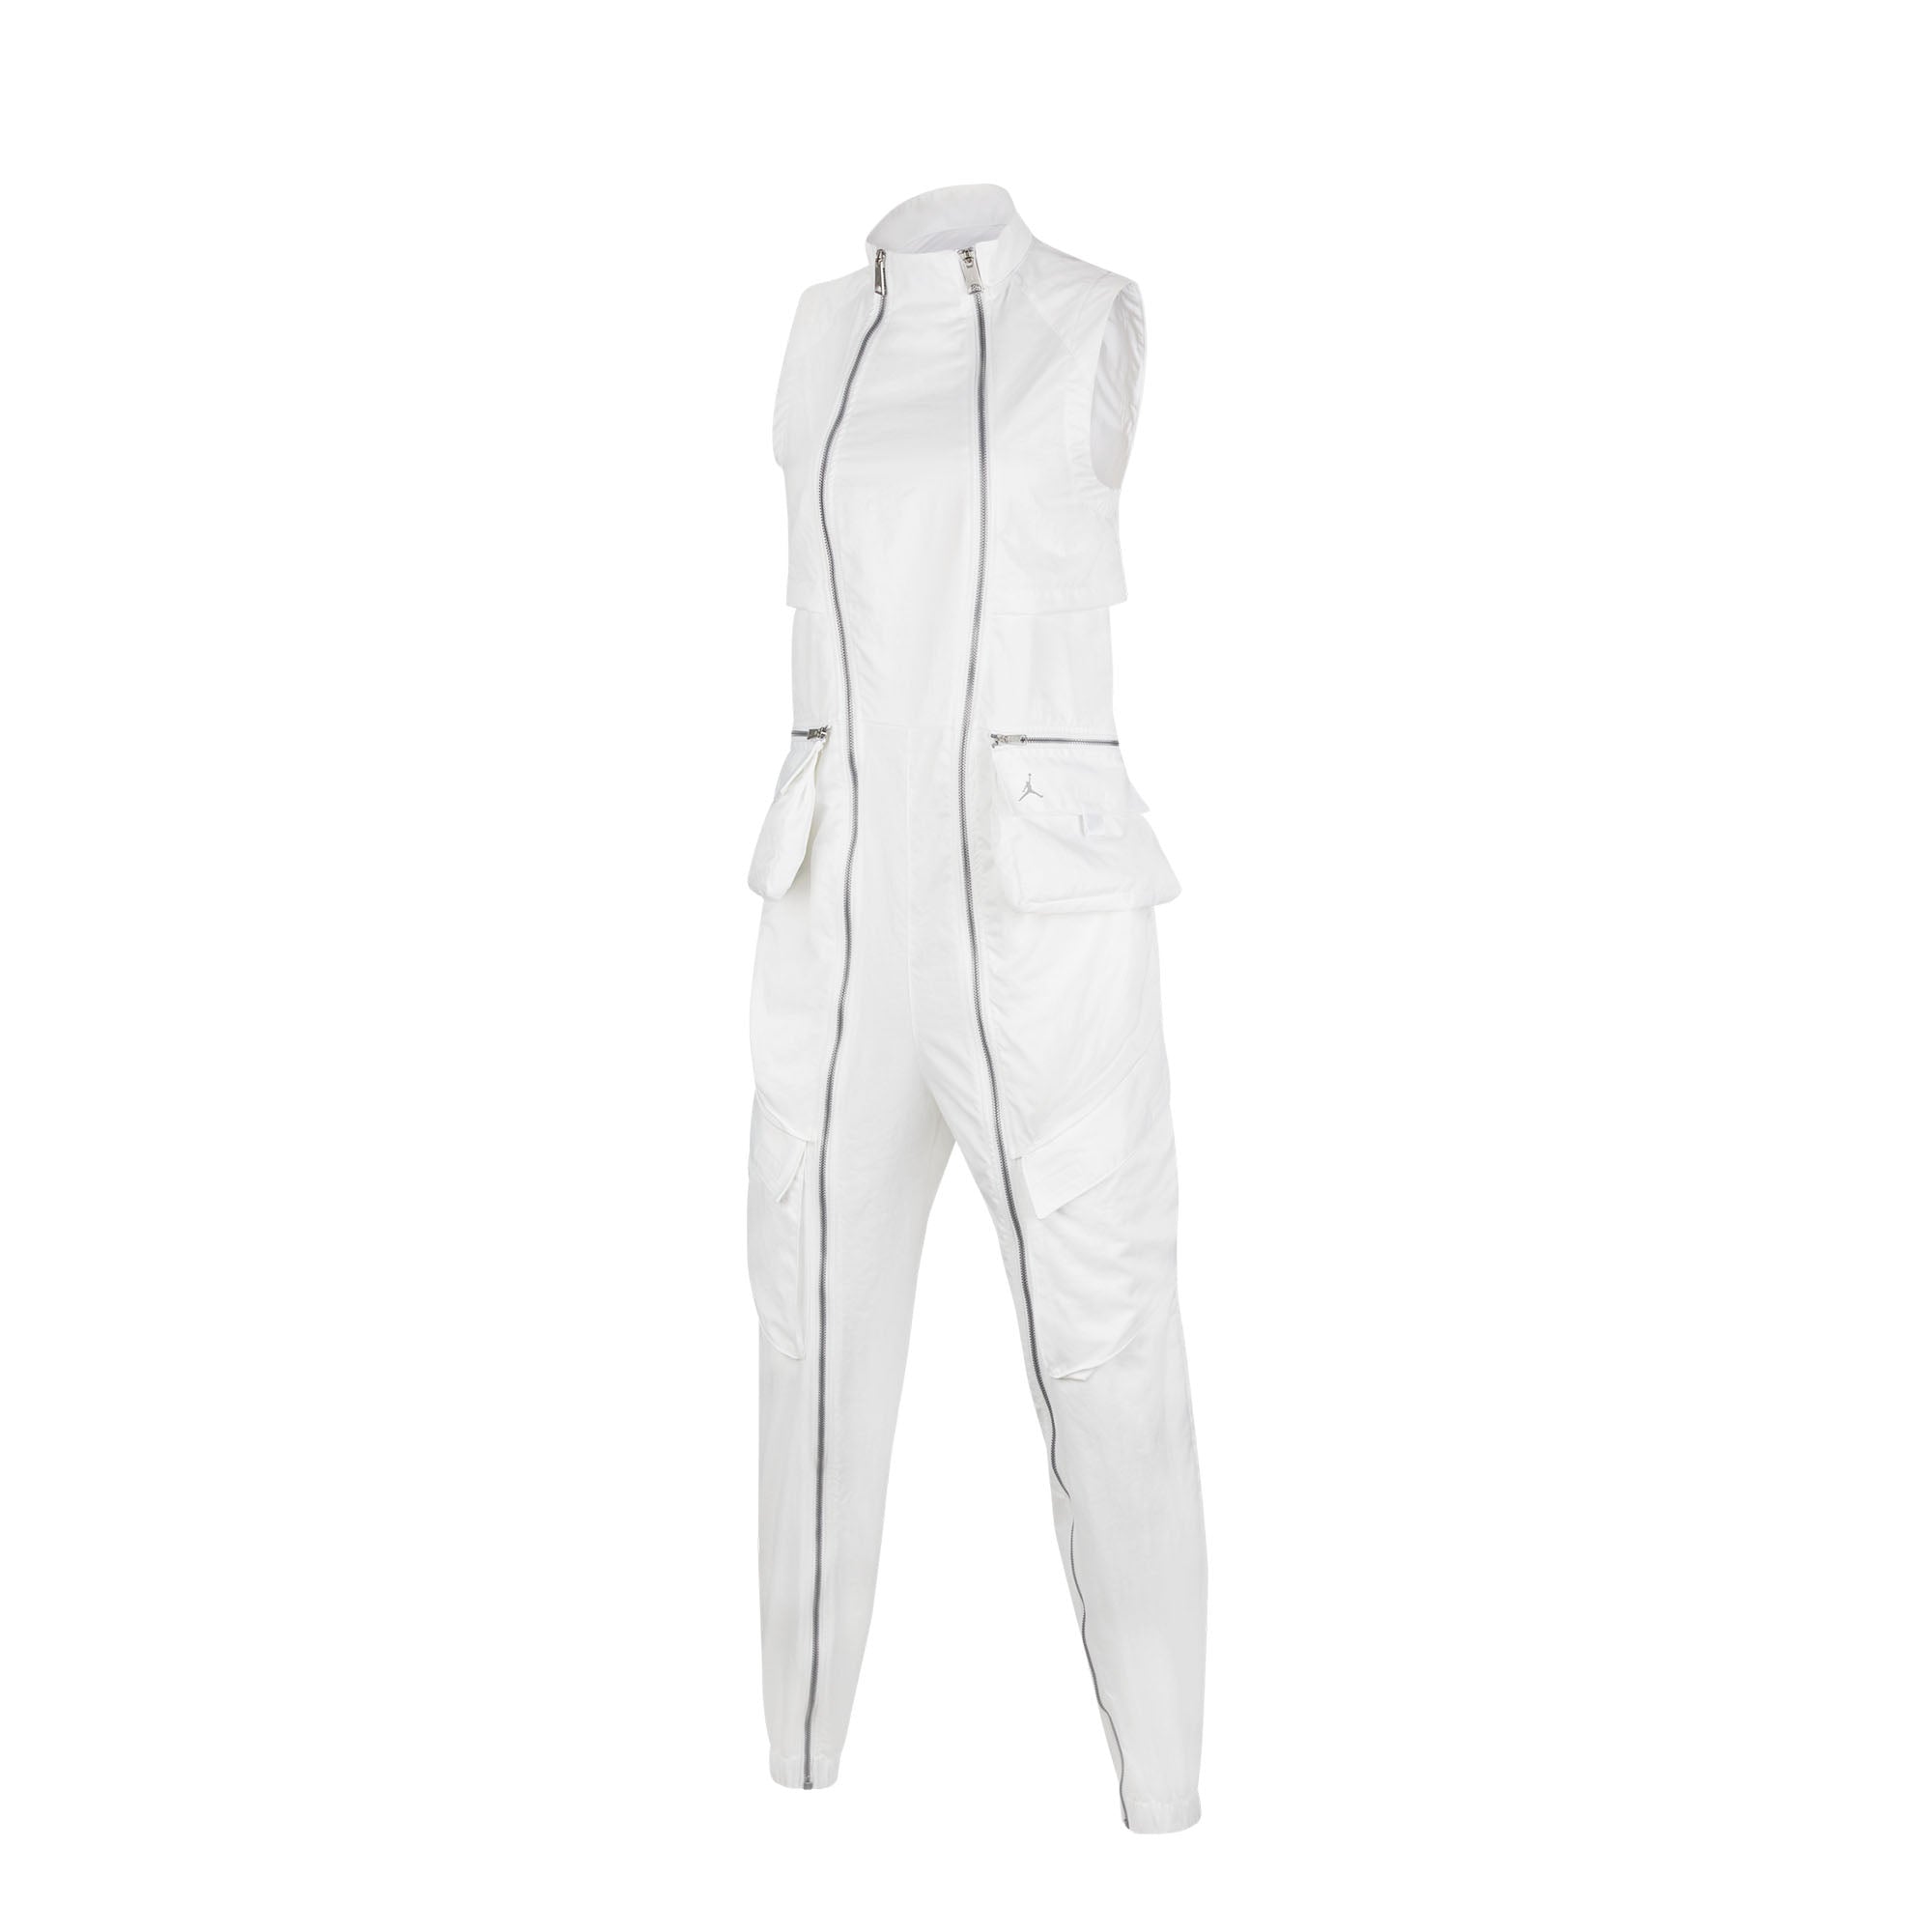 Nike Jordan jumpsuit in white with utility pockets